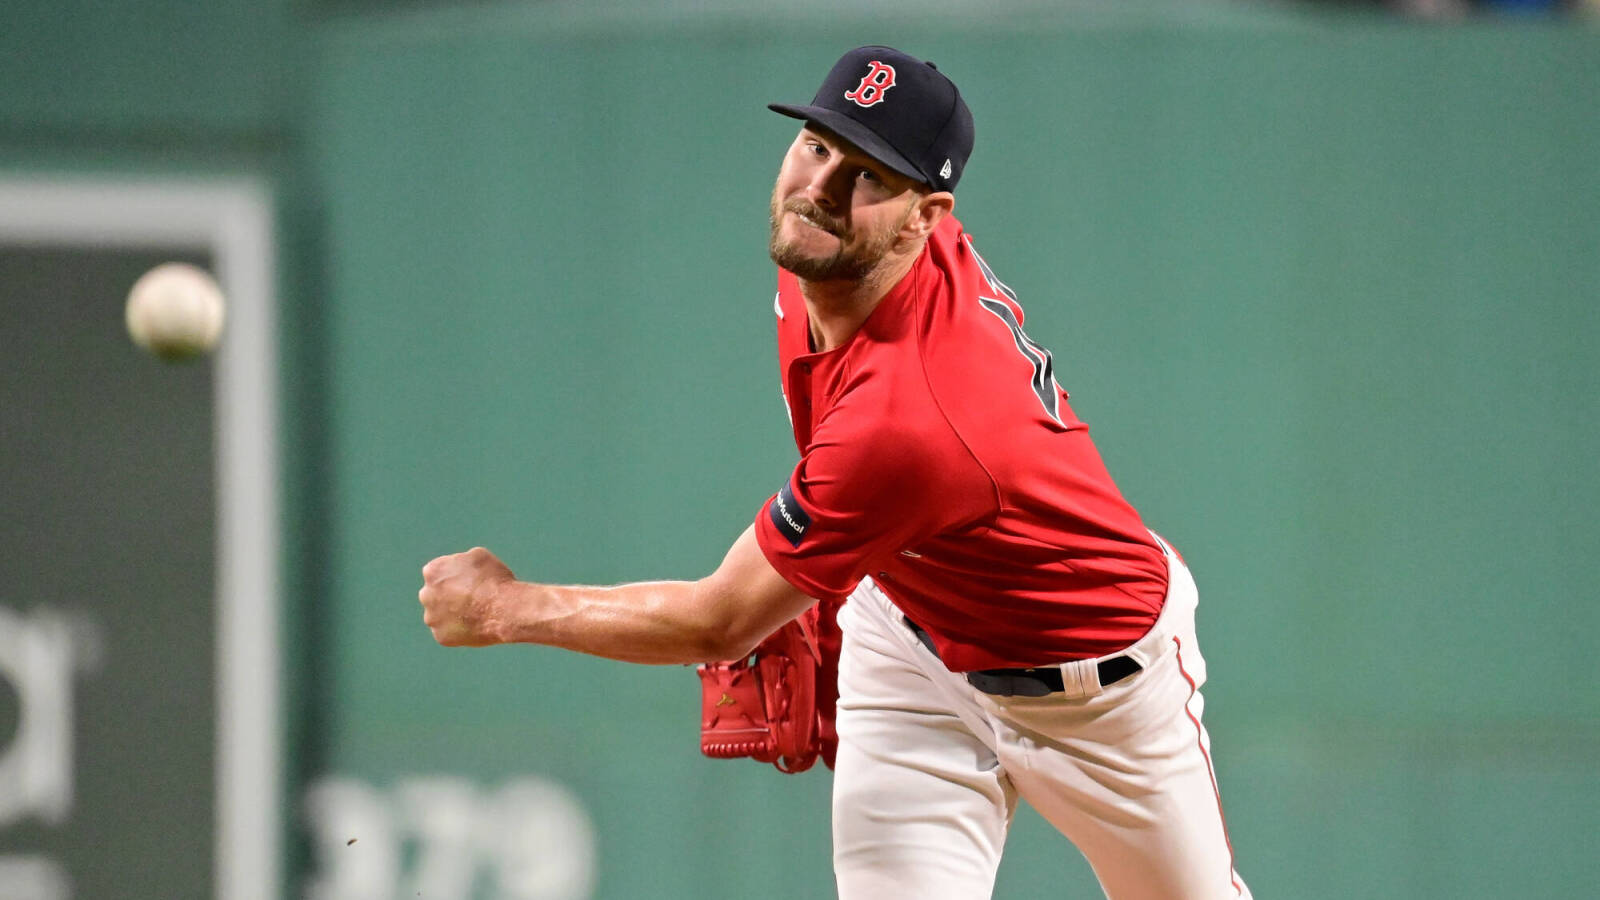 The Chris Sale trade caught everyone by surprise, including Chris Sale